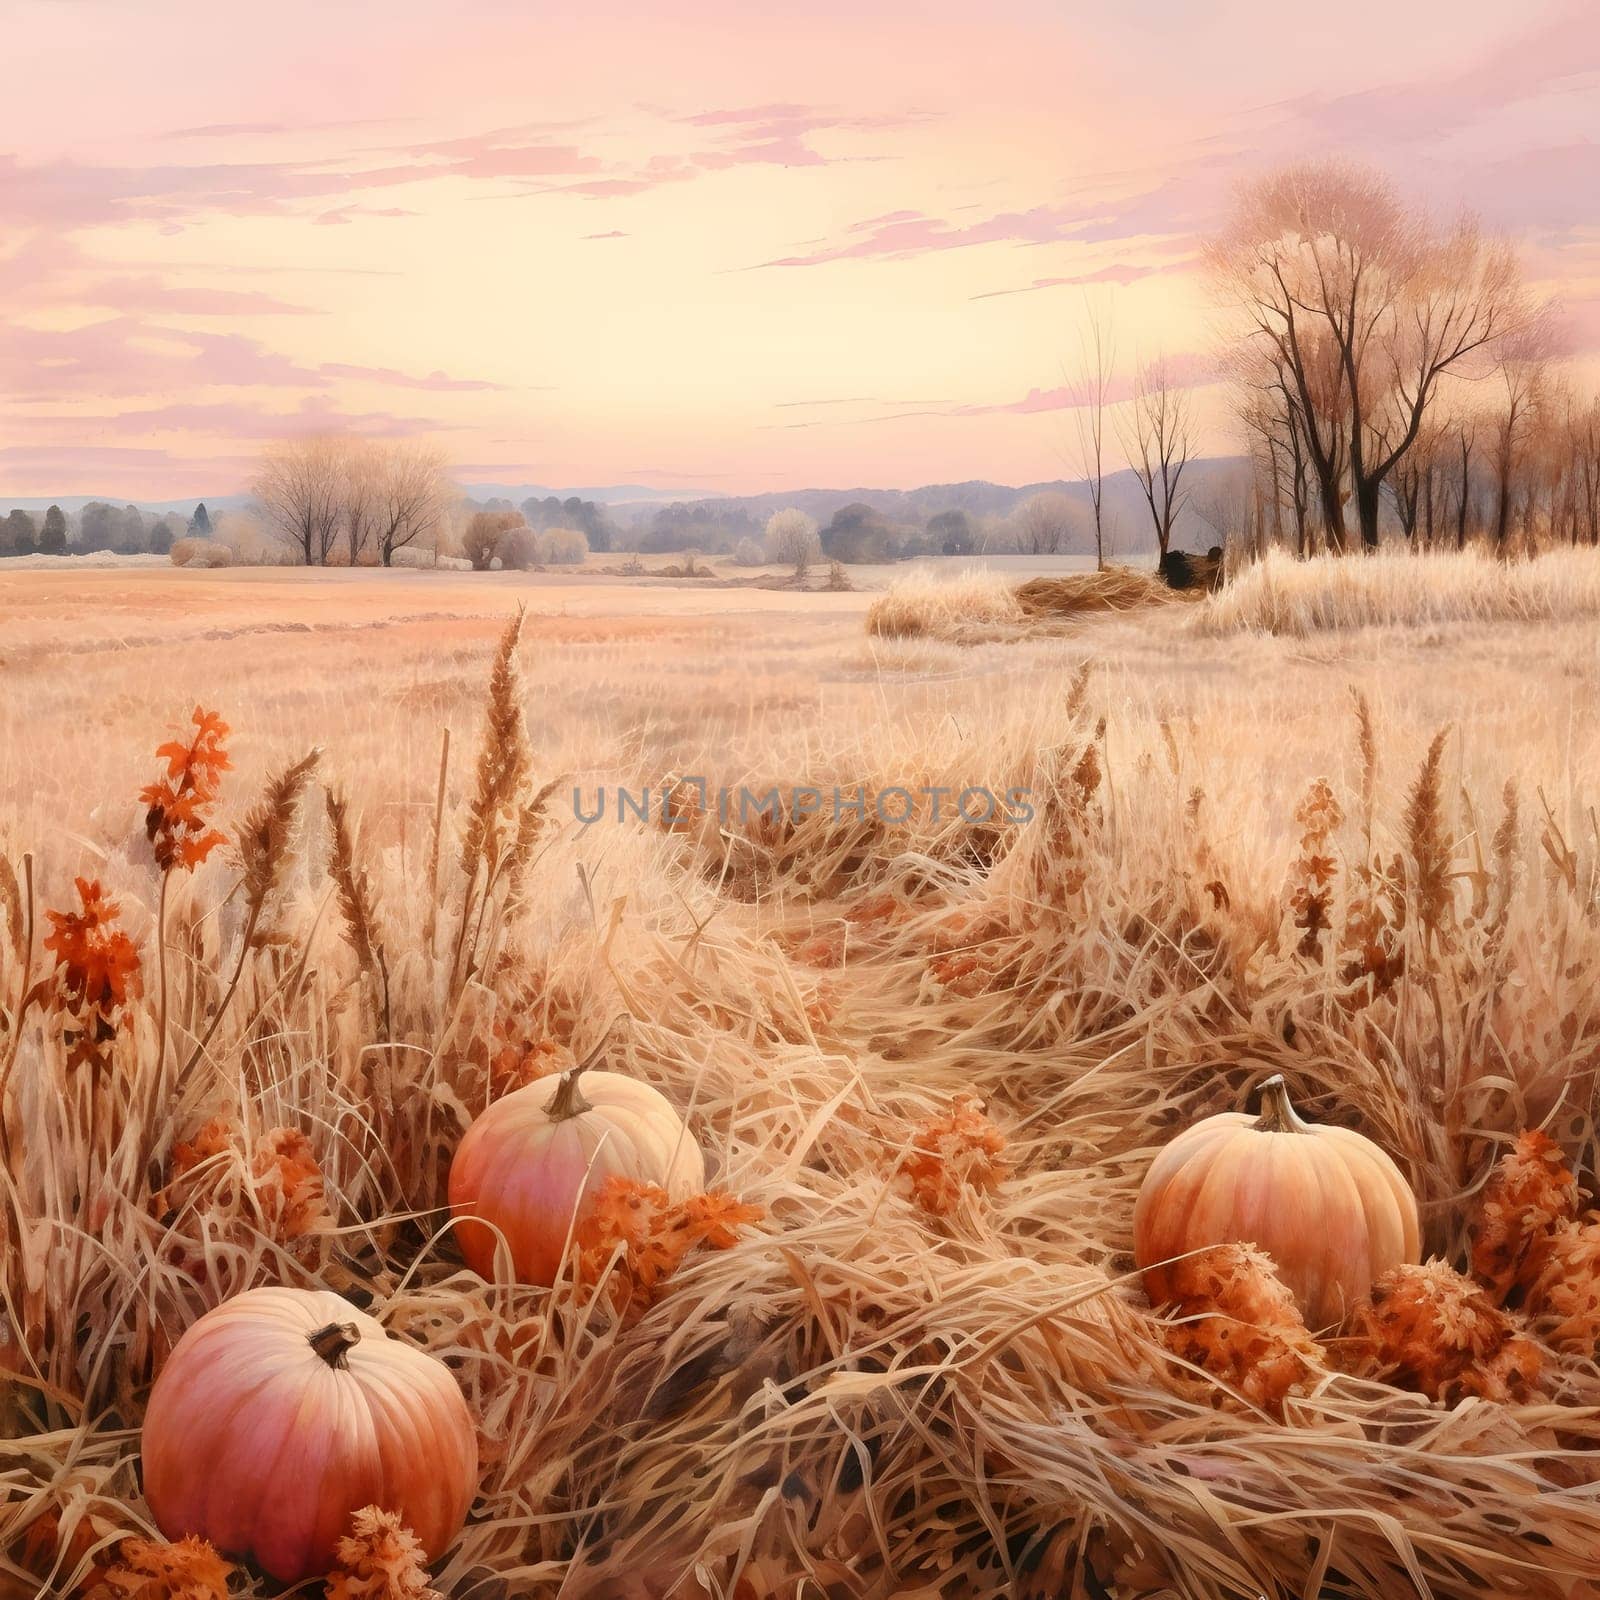 Grain field in autumn after harvest. Pumpkin as a dish of thanksgiving for the harvest. The atmosphere of joy and celebration.